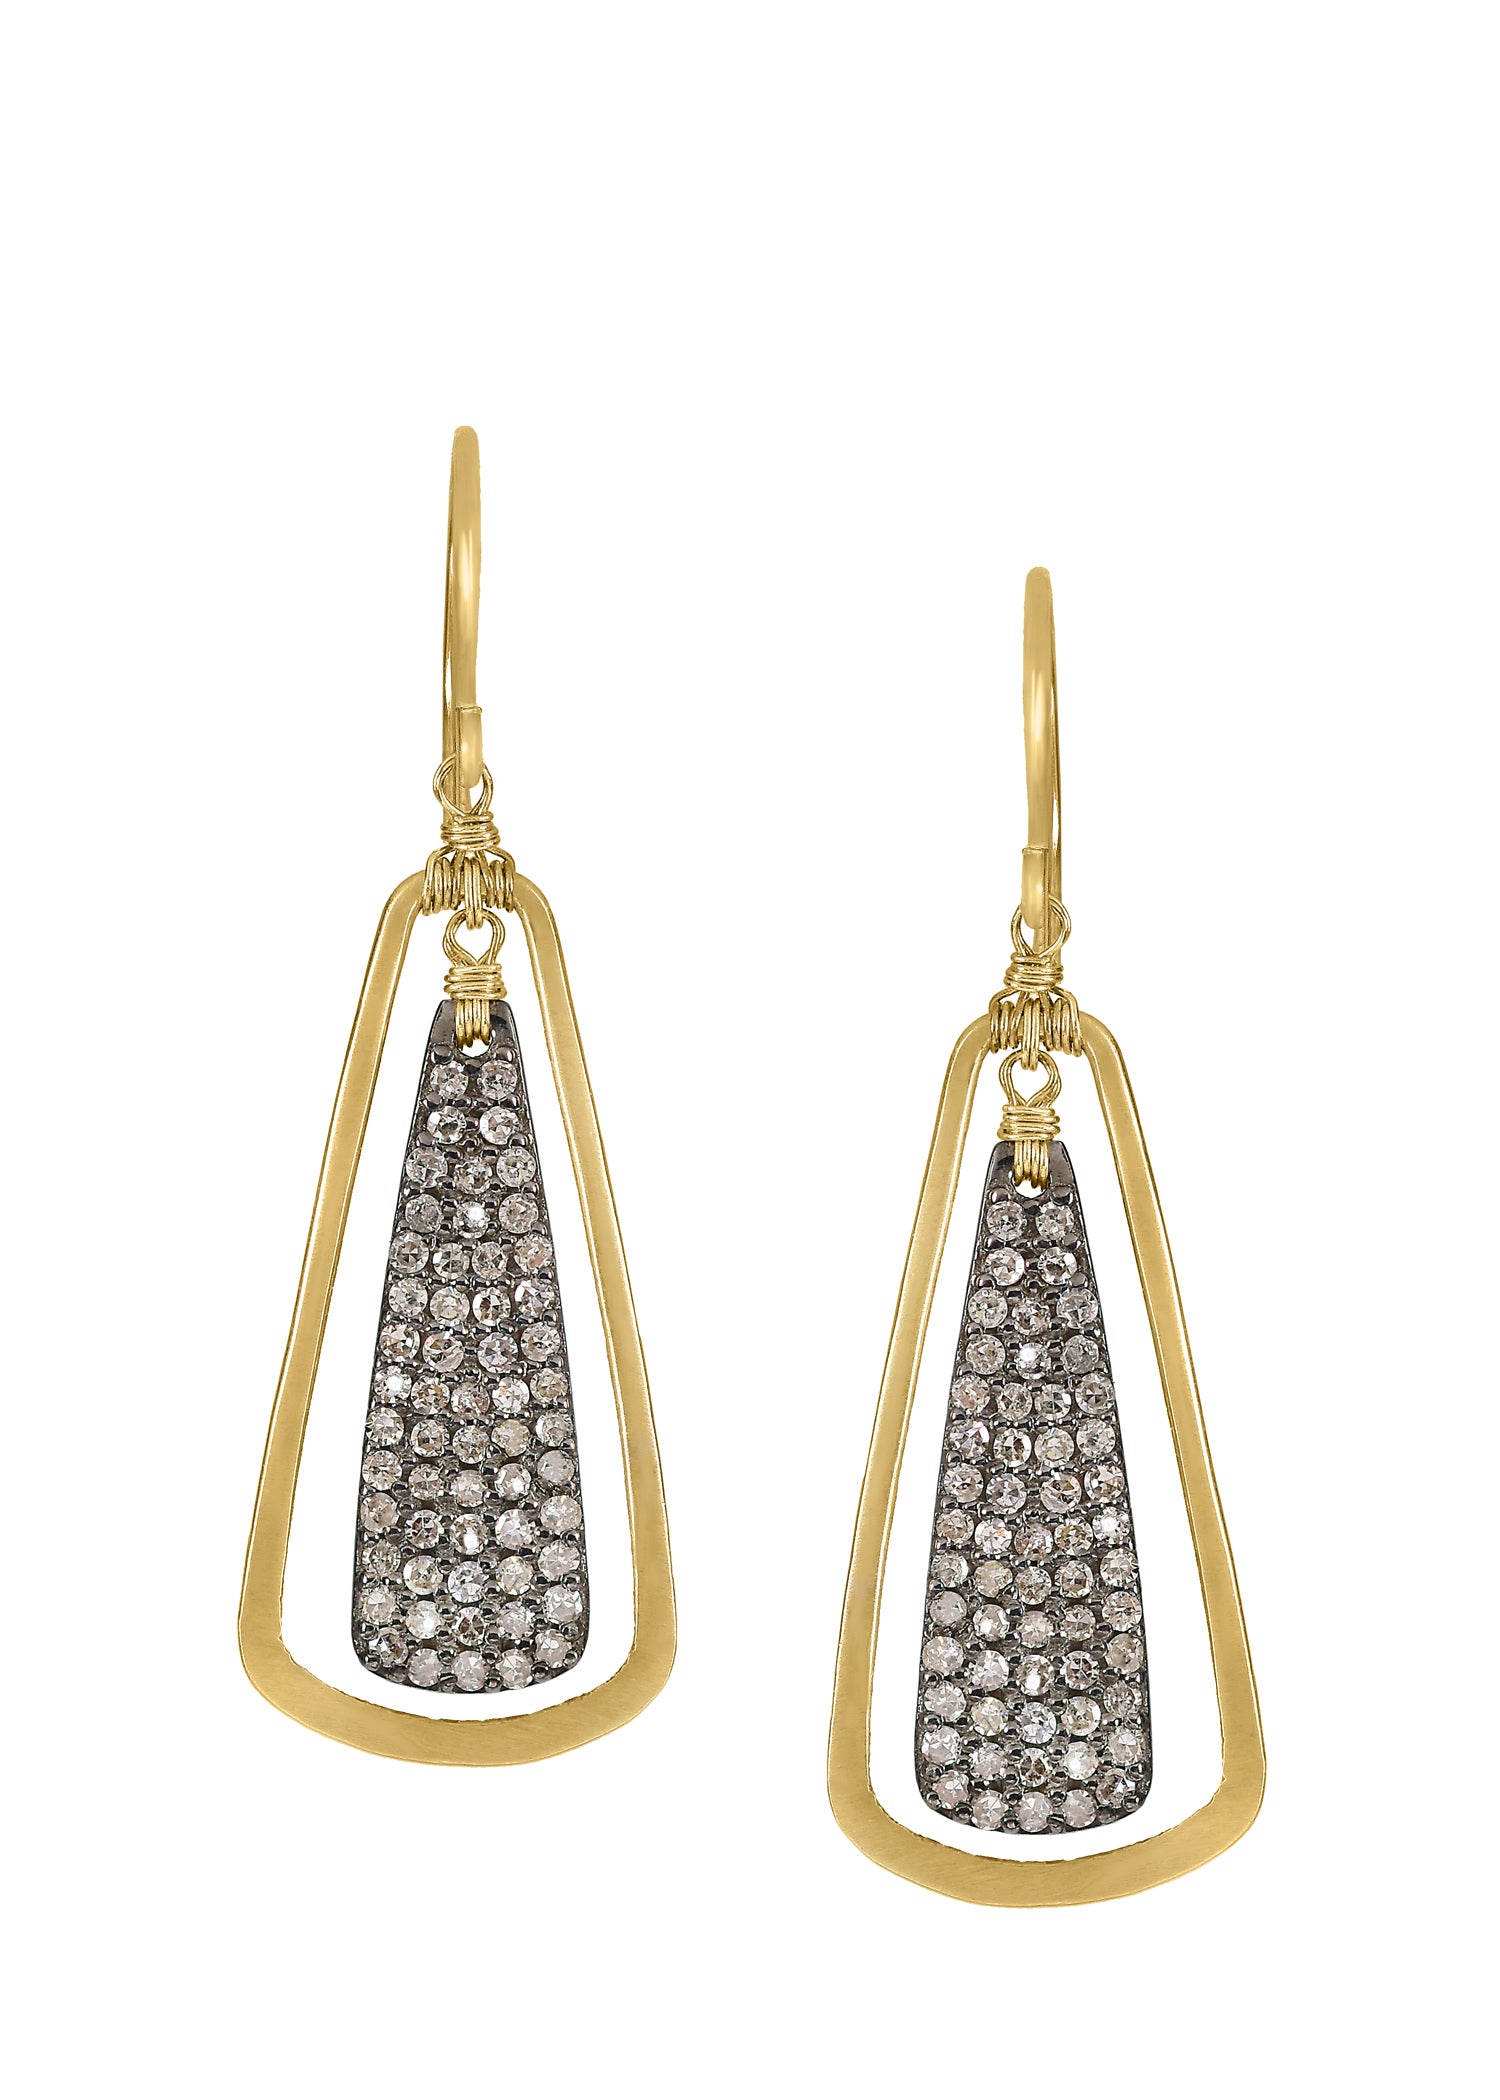 Diamond 14k gold Sterling silver Mixed metal Special order only Earrings measure 1-1/2" in length (including the ear wires) and 1/2" in width at the widest point Handmade in our Los Angeles studio